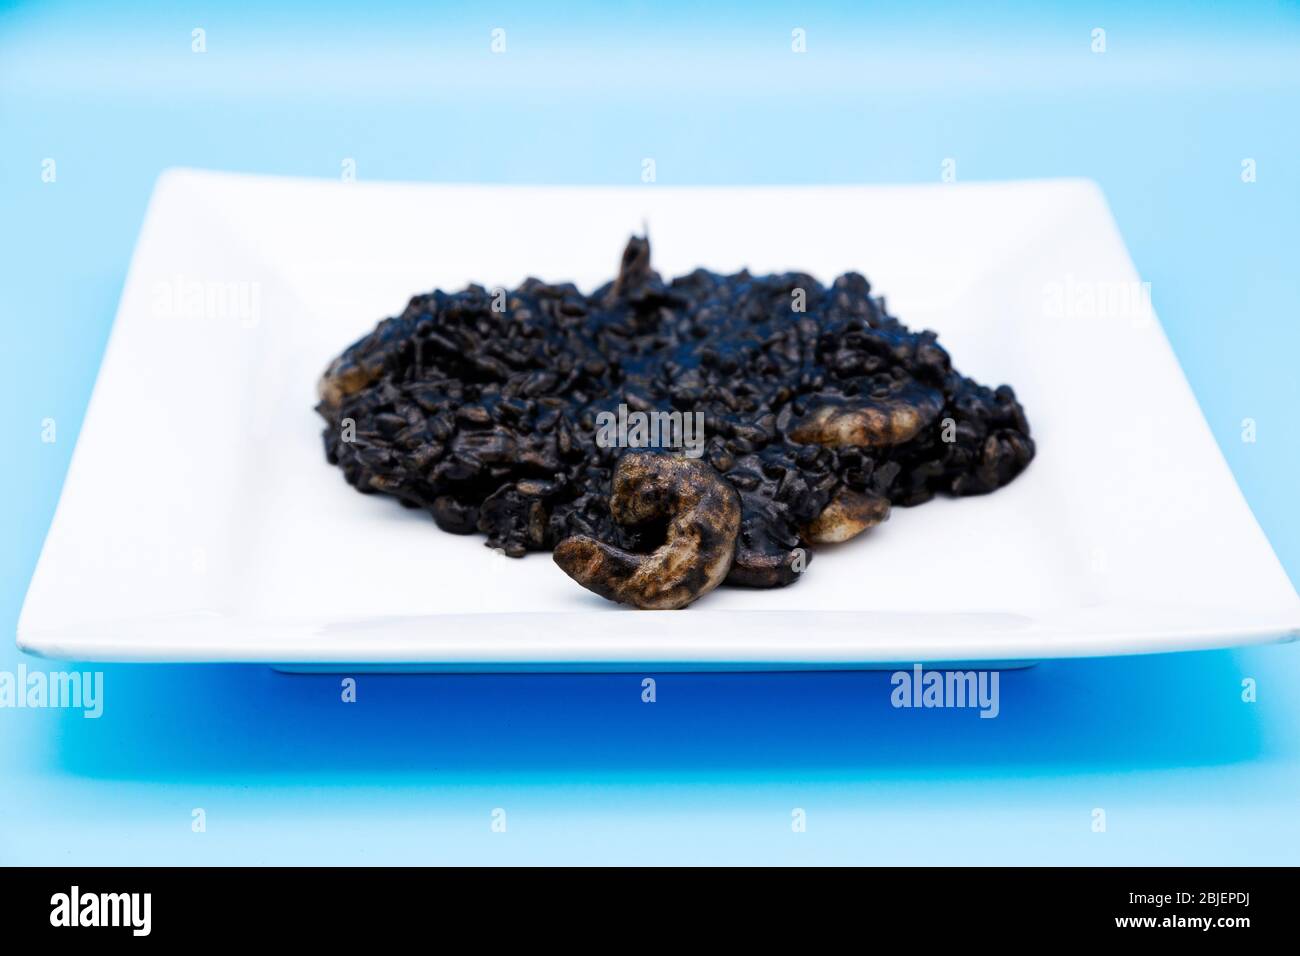 Home-cooked black risotto, a rice dish made with seafood. The dish is blackened by squid ink and known as crni rižot in Croatia, where it originates. Stock Photo